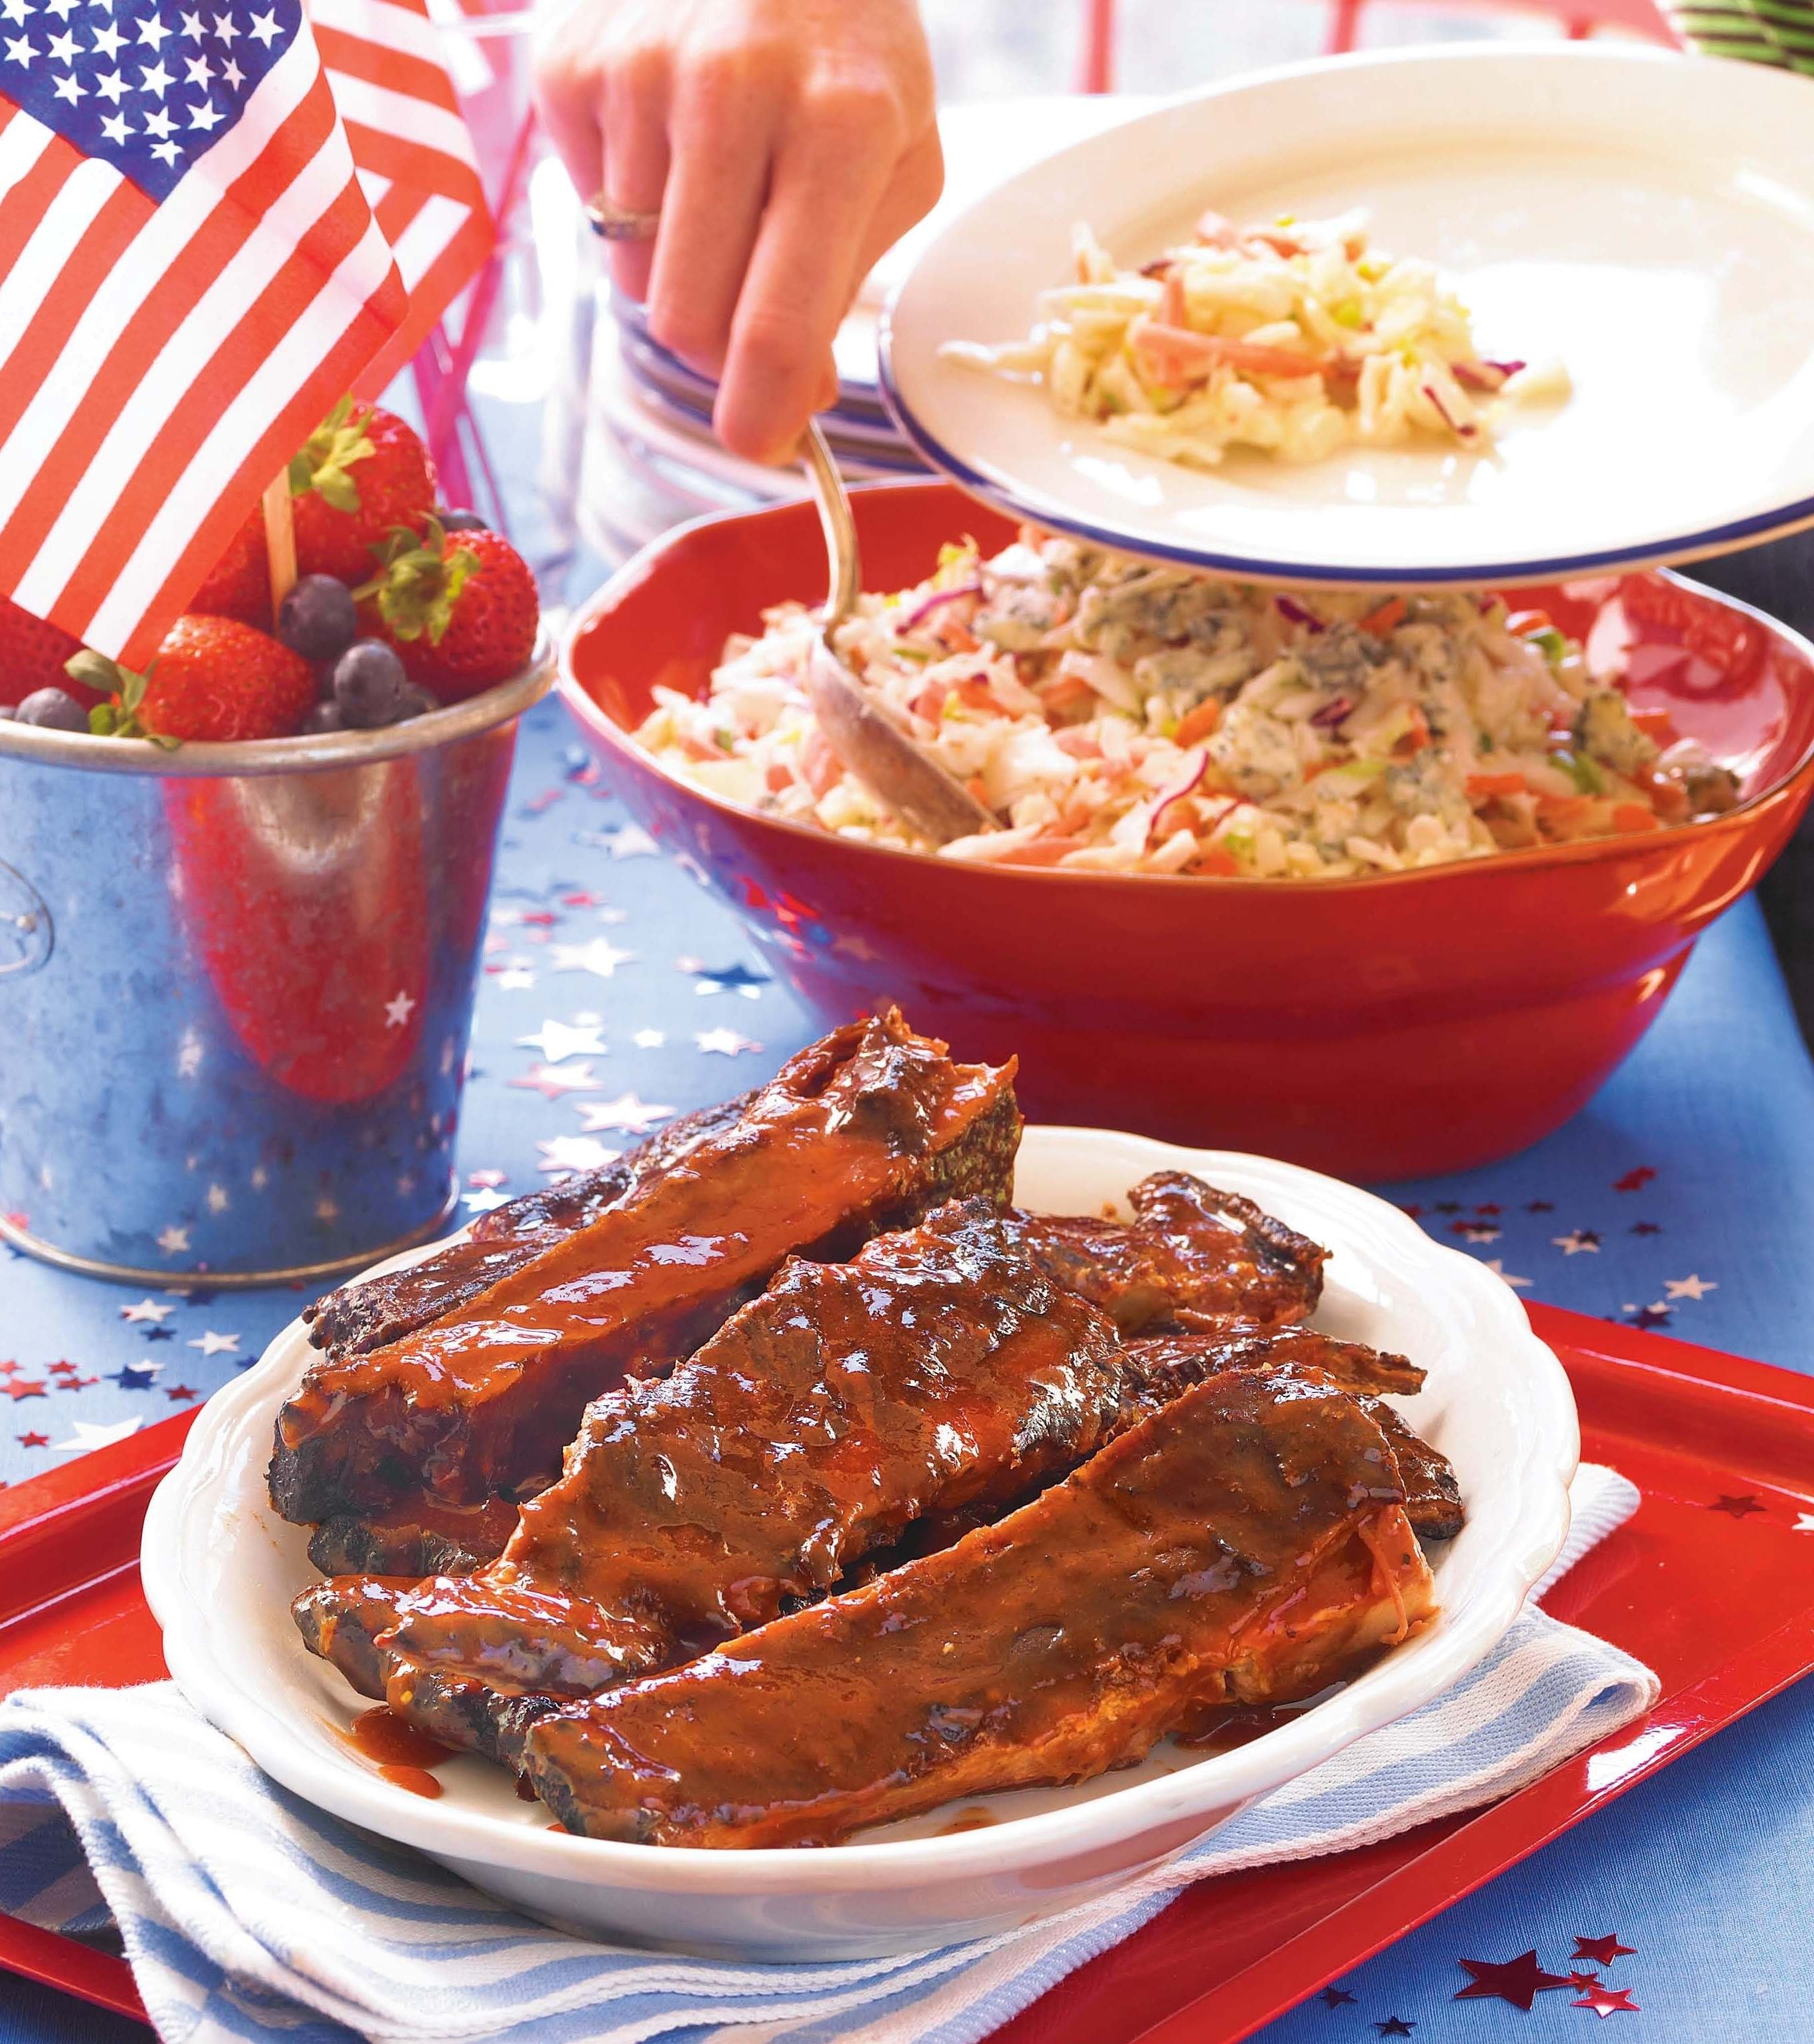 10 Great Fourth Of July Bbq Ideas family fun july 4 ideas 4th of july recipe ideas from the half 8 2022